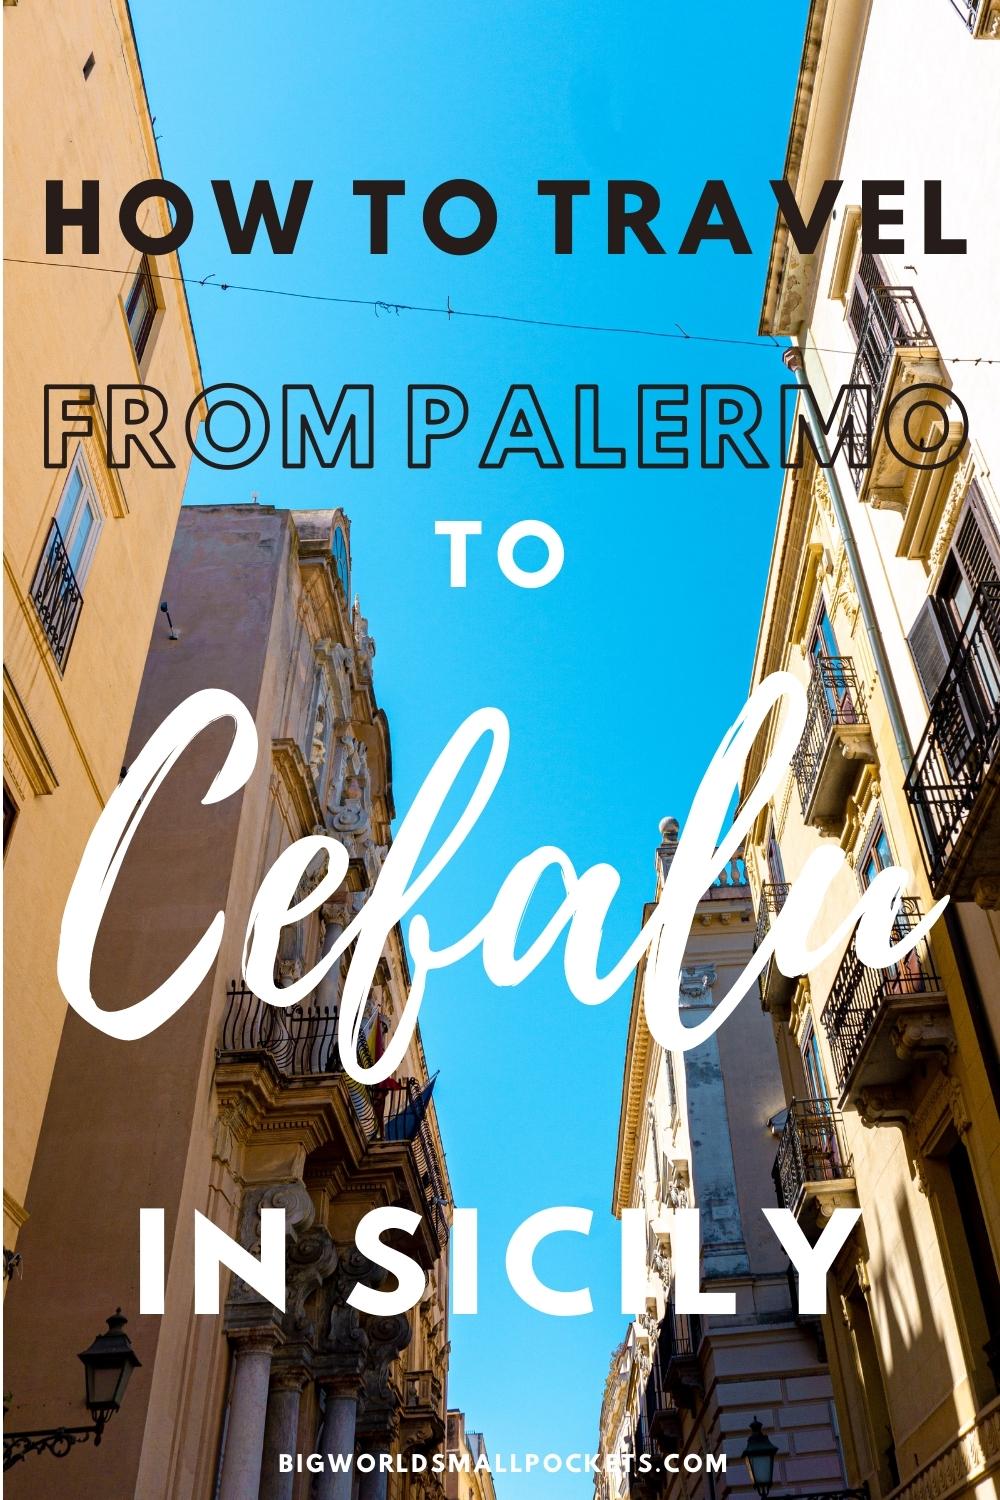 How to Travel from Palermo to Cefalù in Sicily, Italy